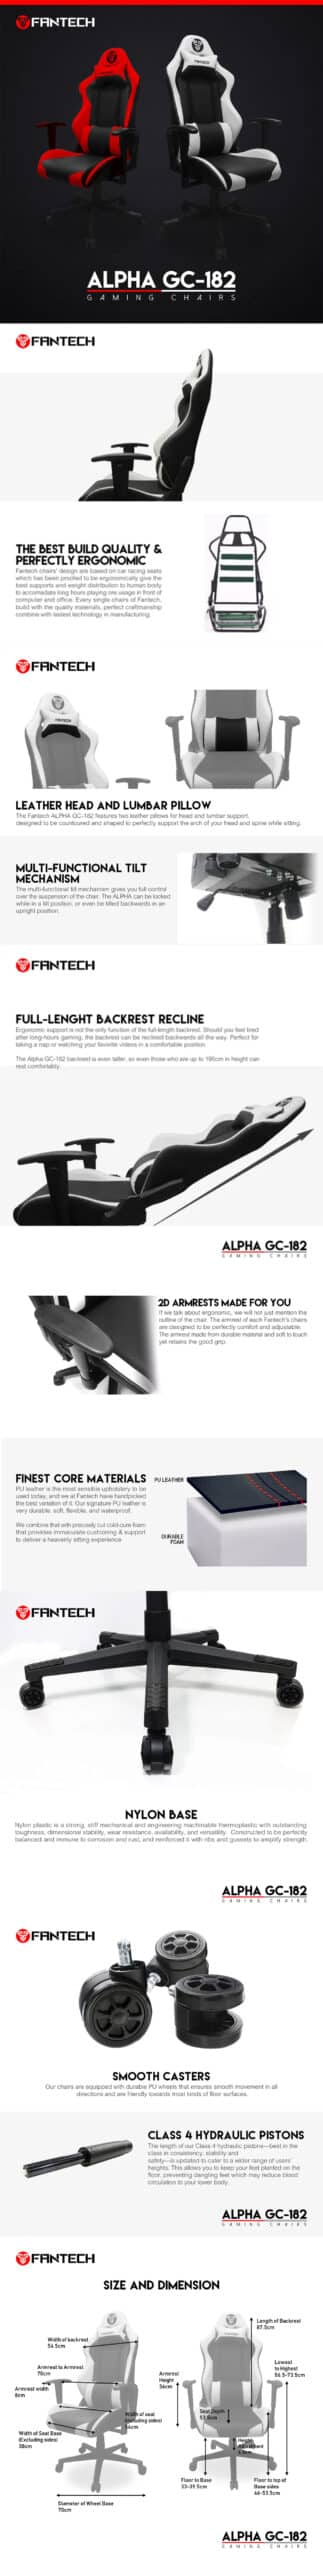 Fantech GC182 Alpha Gaming Chair 5 scaled